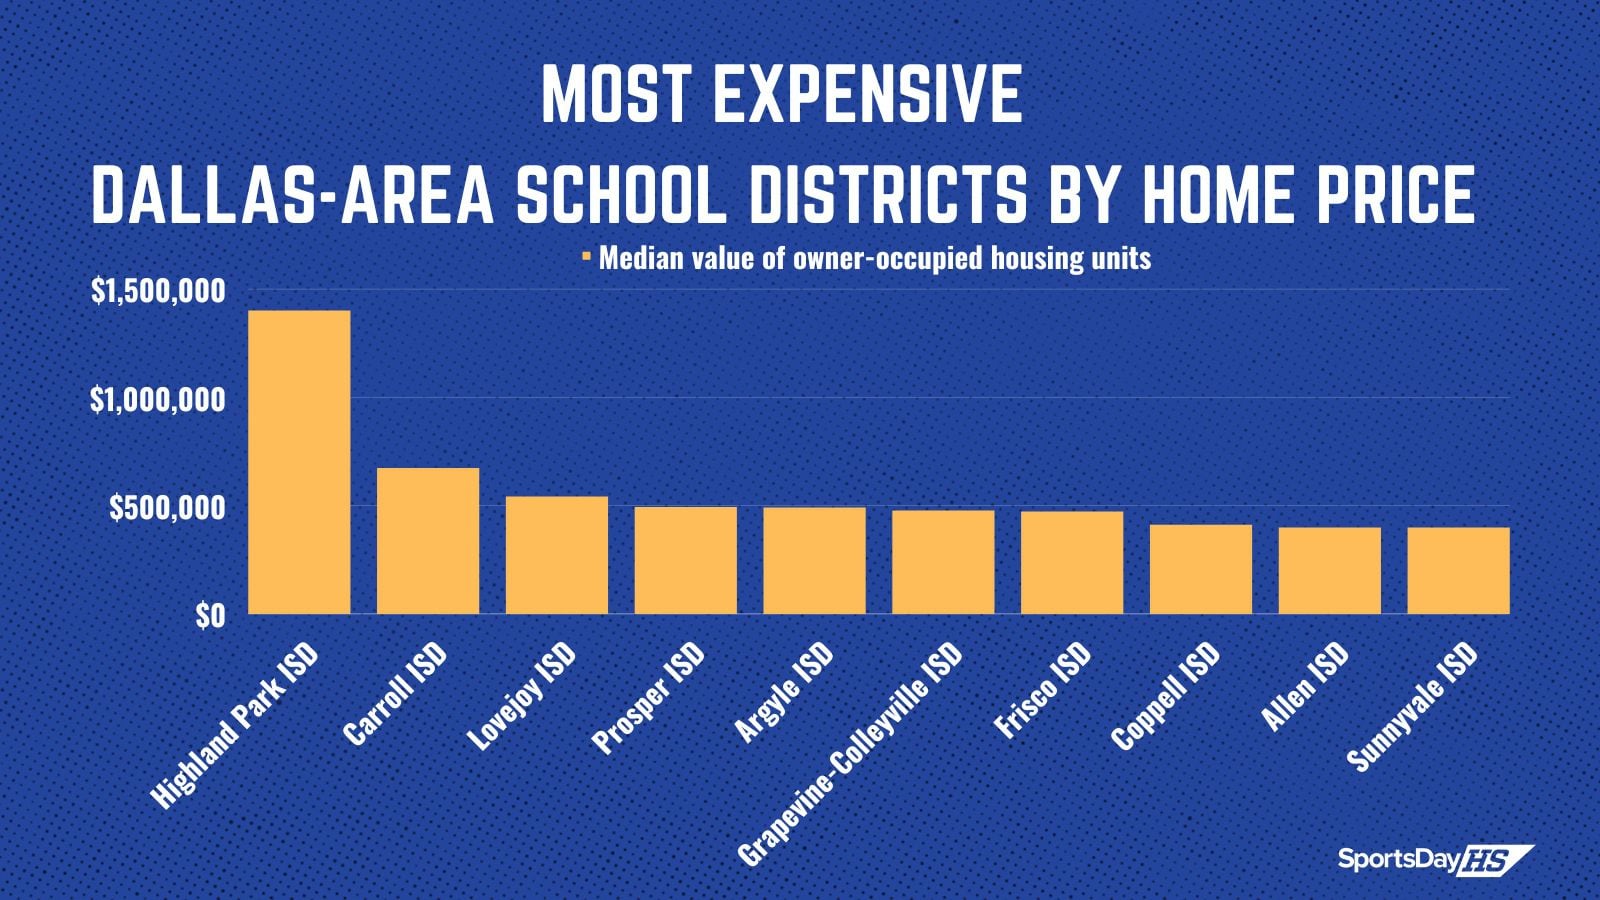 A look at the top 10 most expensive Dallas-area school districts by home price